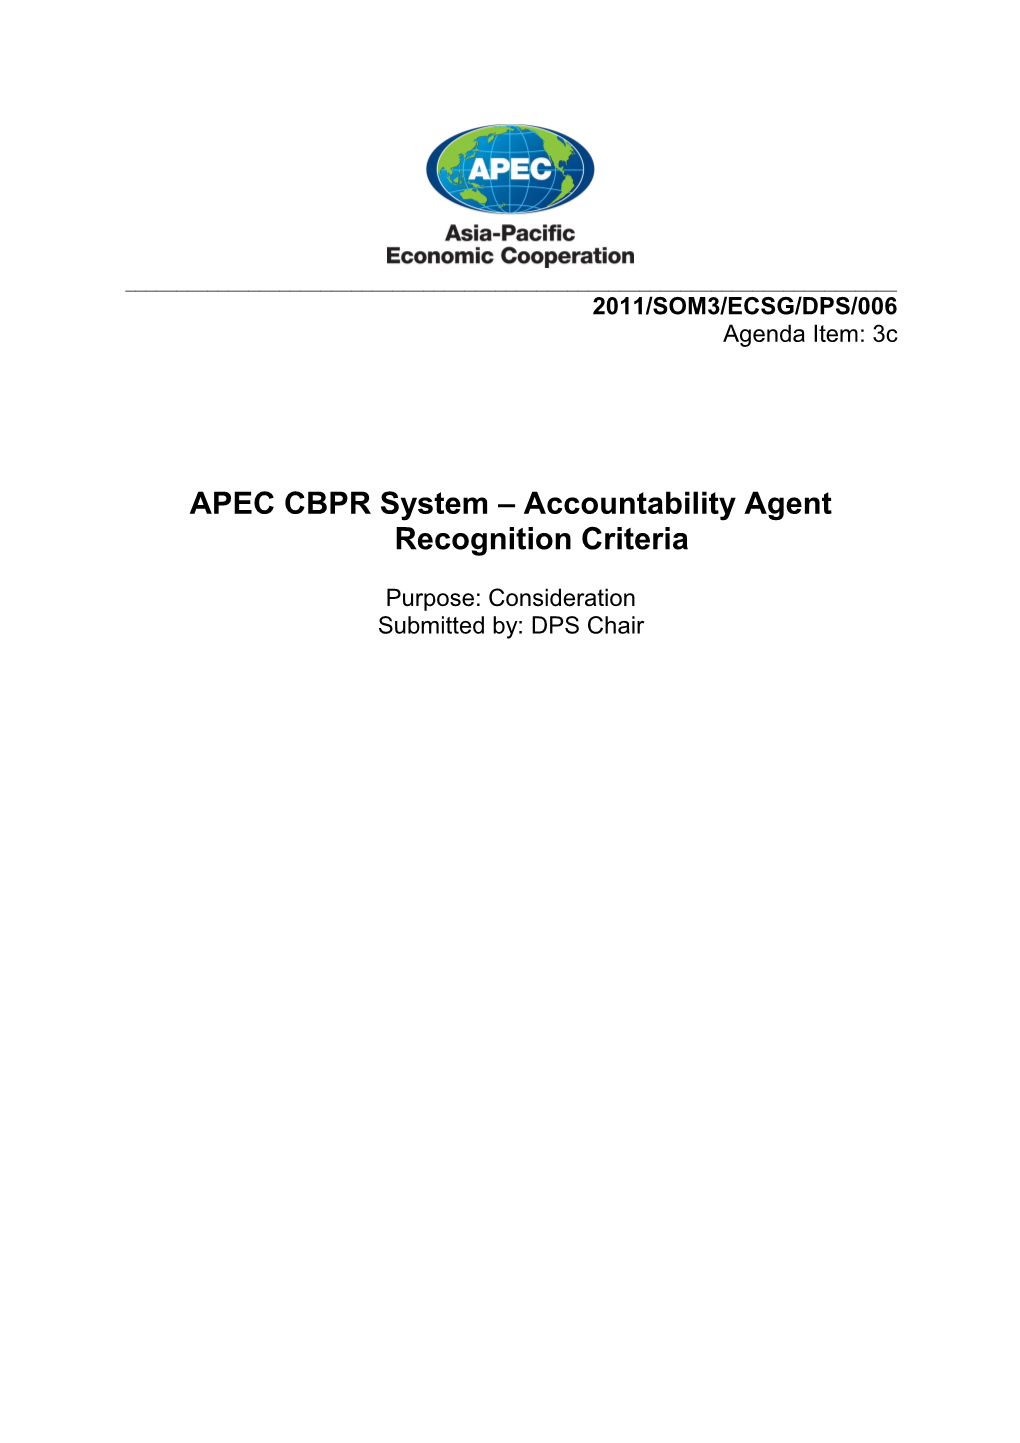 Project 2: Private Sector Accountability Agent Recognition Criteria